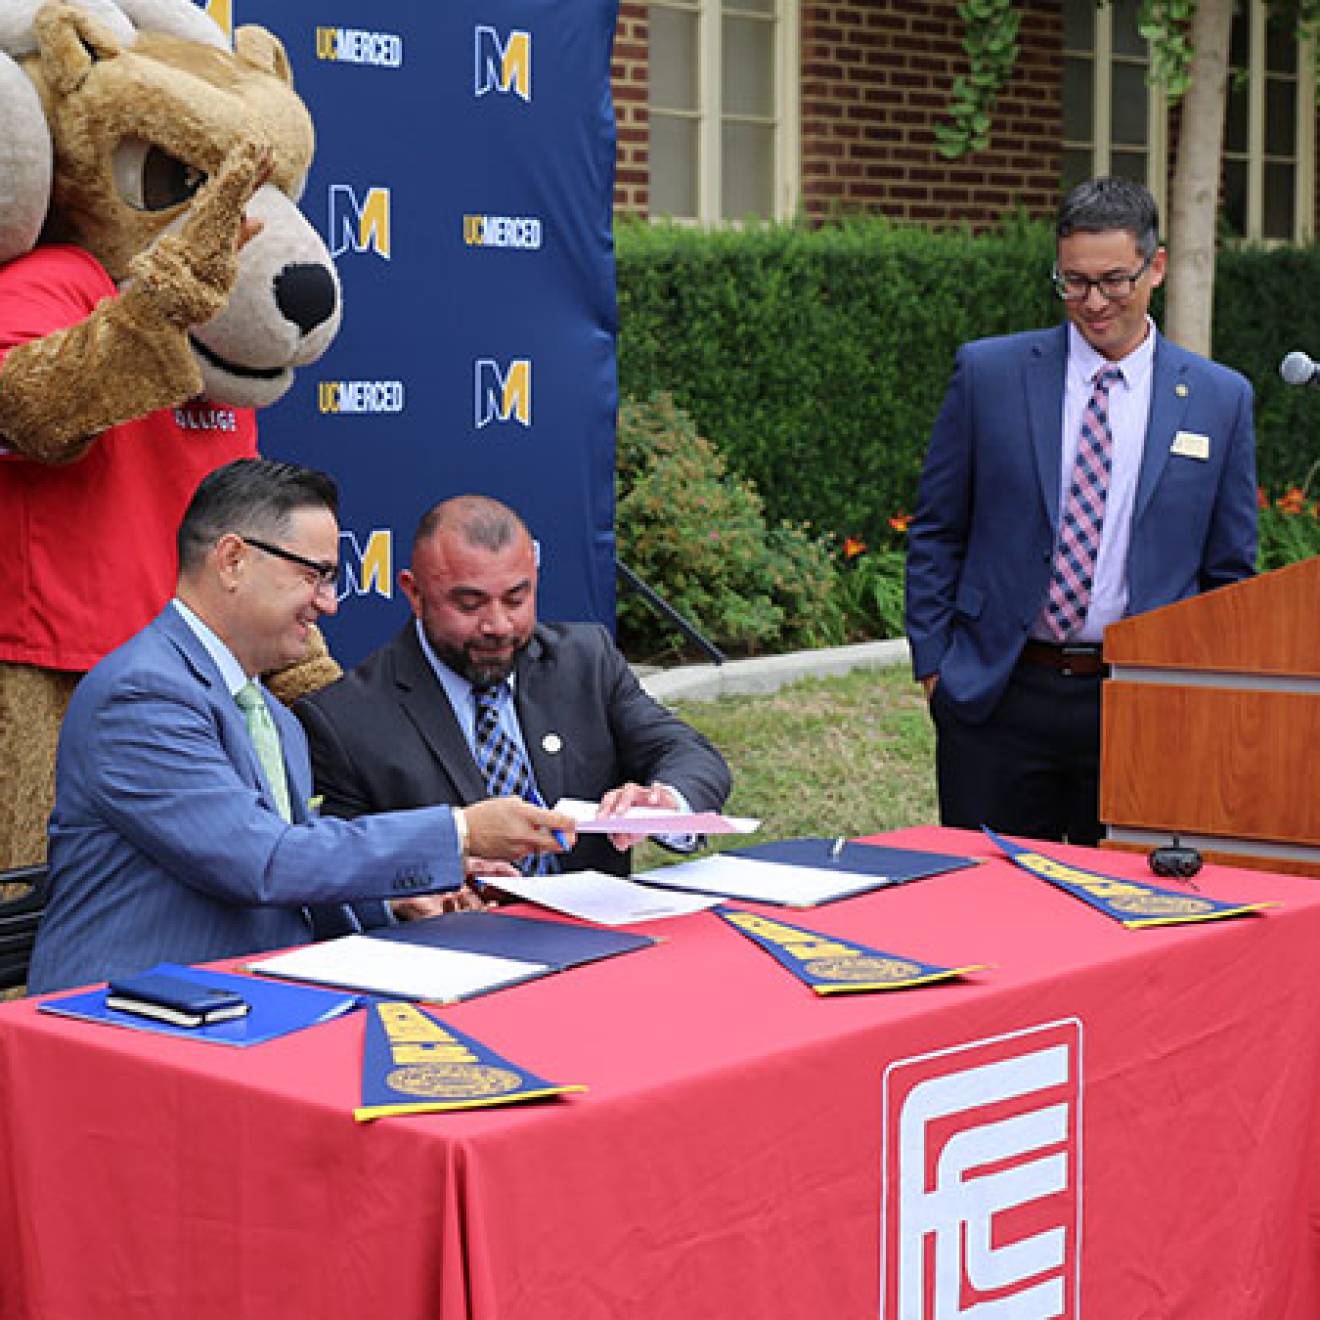 A ram mascot behind two men at a table passing a paper while a man at a lectern looks on